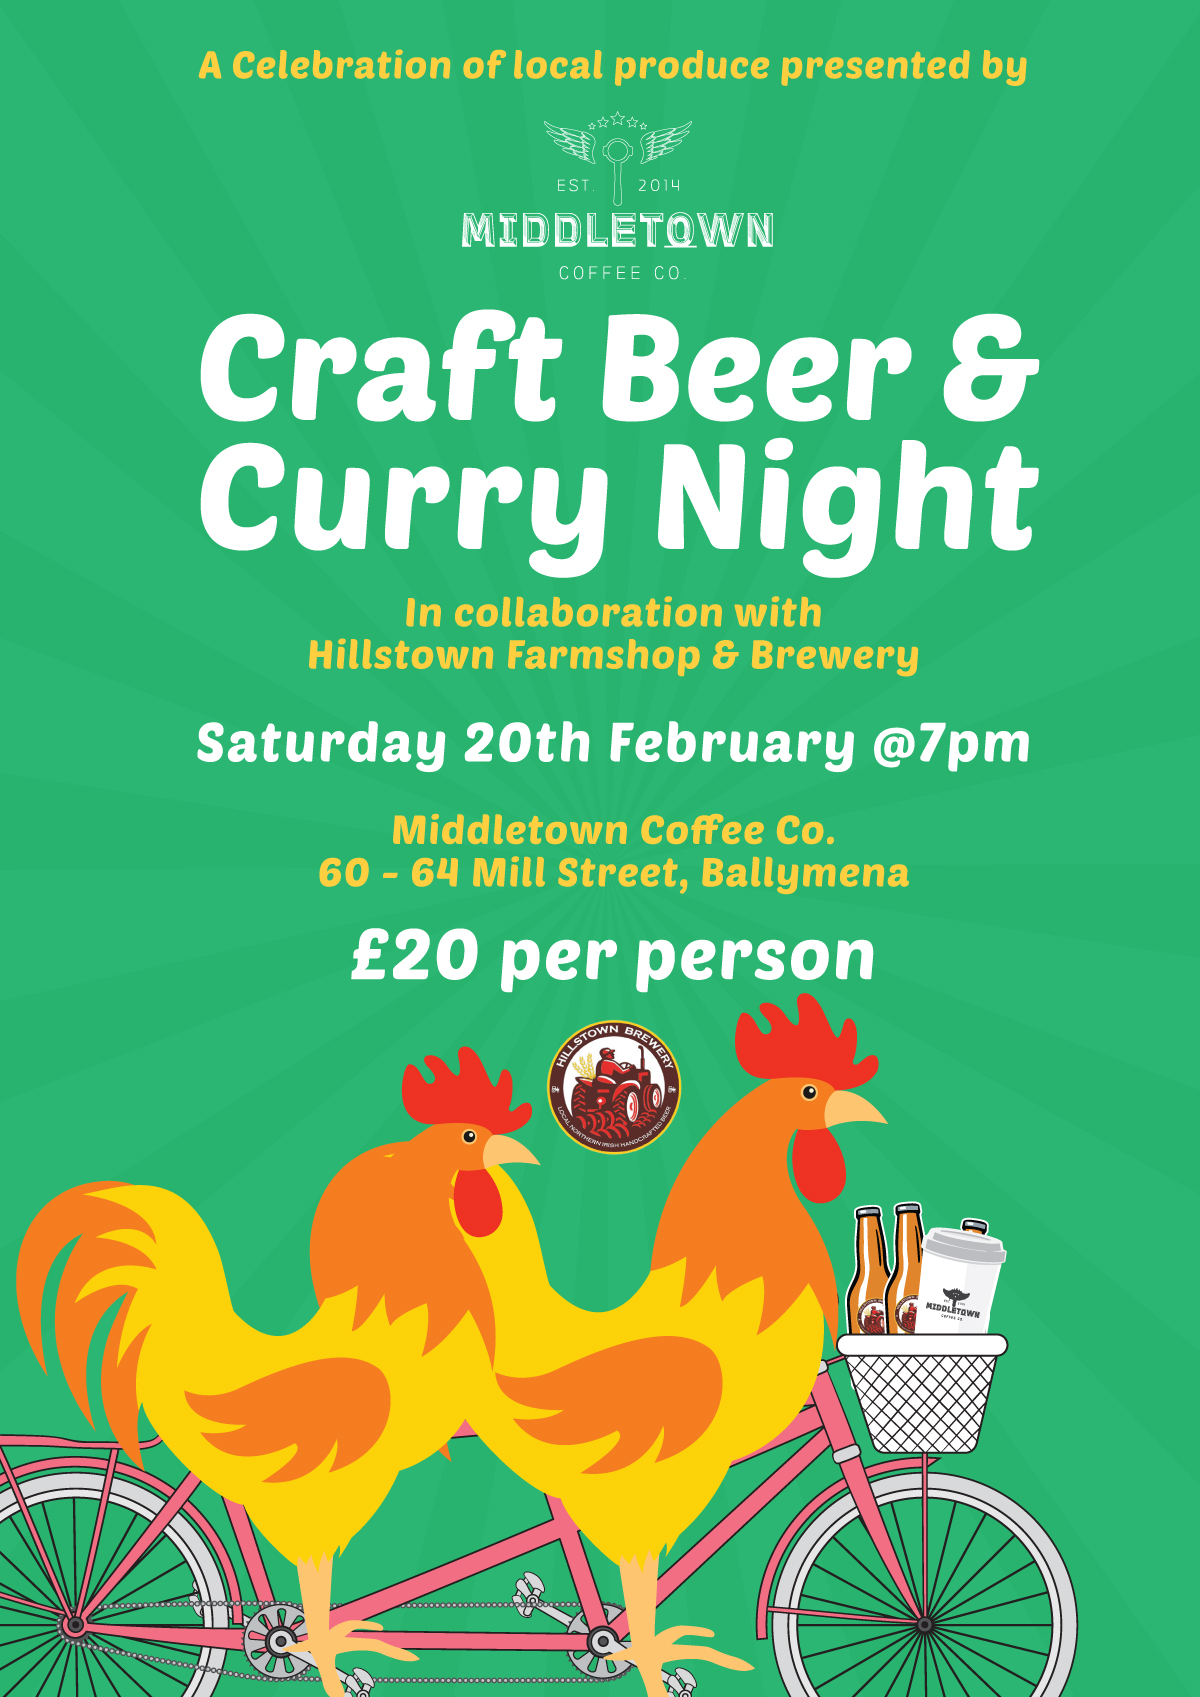 Craft Beer & Curry event at Middletown Coffee Co